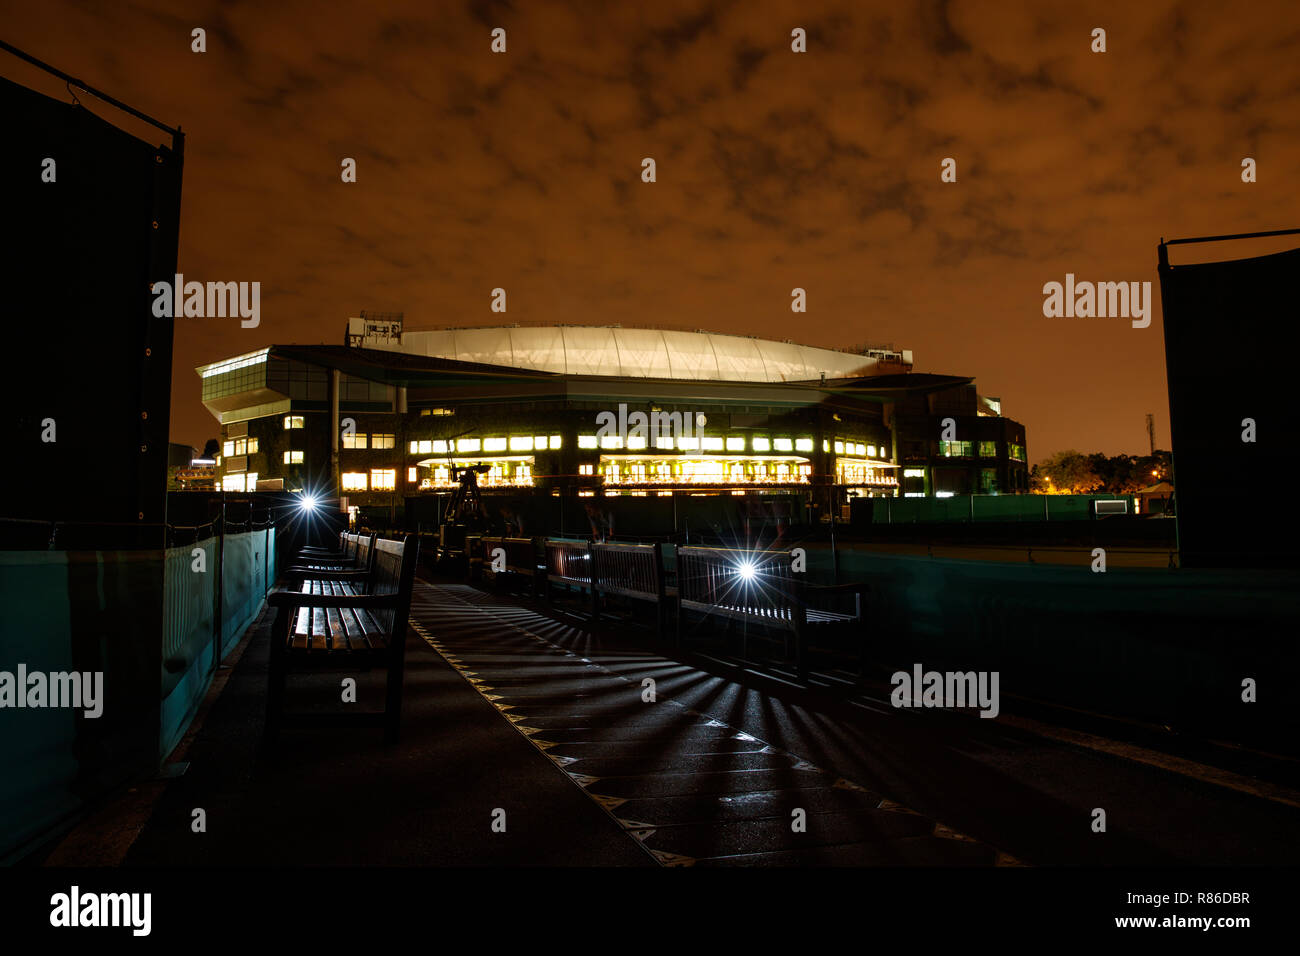 General view exterior shots of Centre Court at night during the Wimbledon Championships 2018 Stock Photo